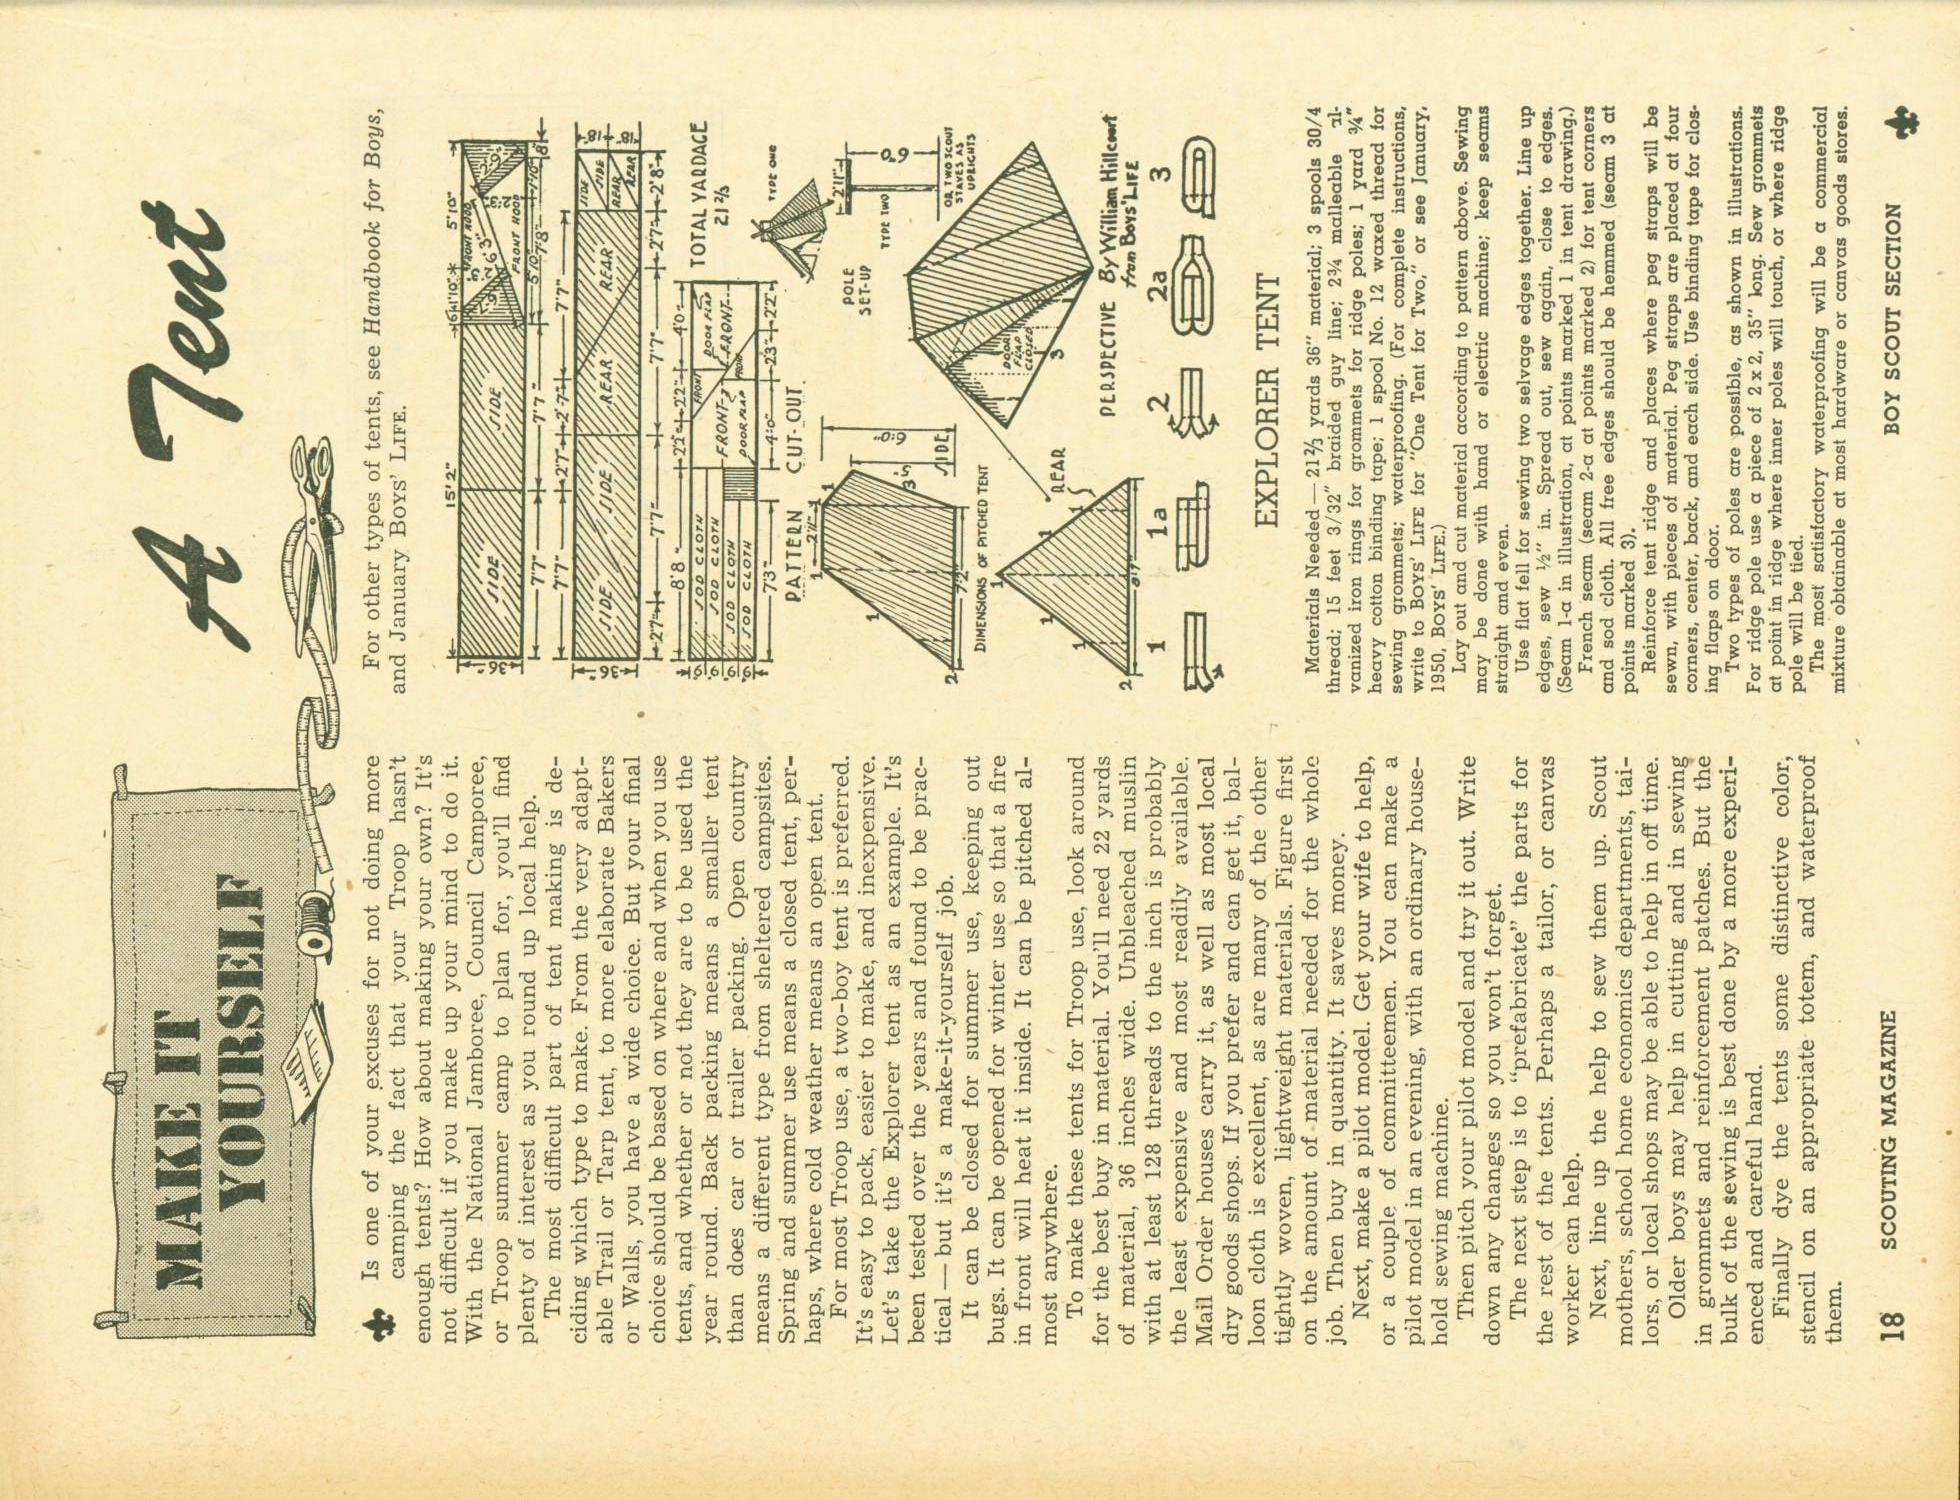 Scouting, Volume 38, Number 1, January 1950
                                                
                                                    18
                                                